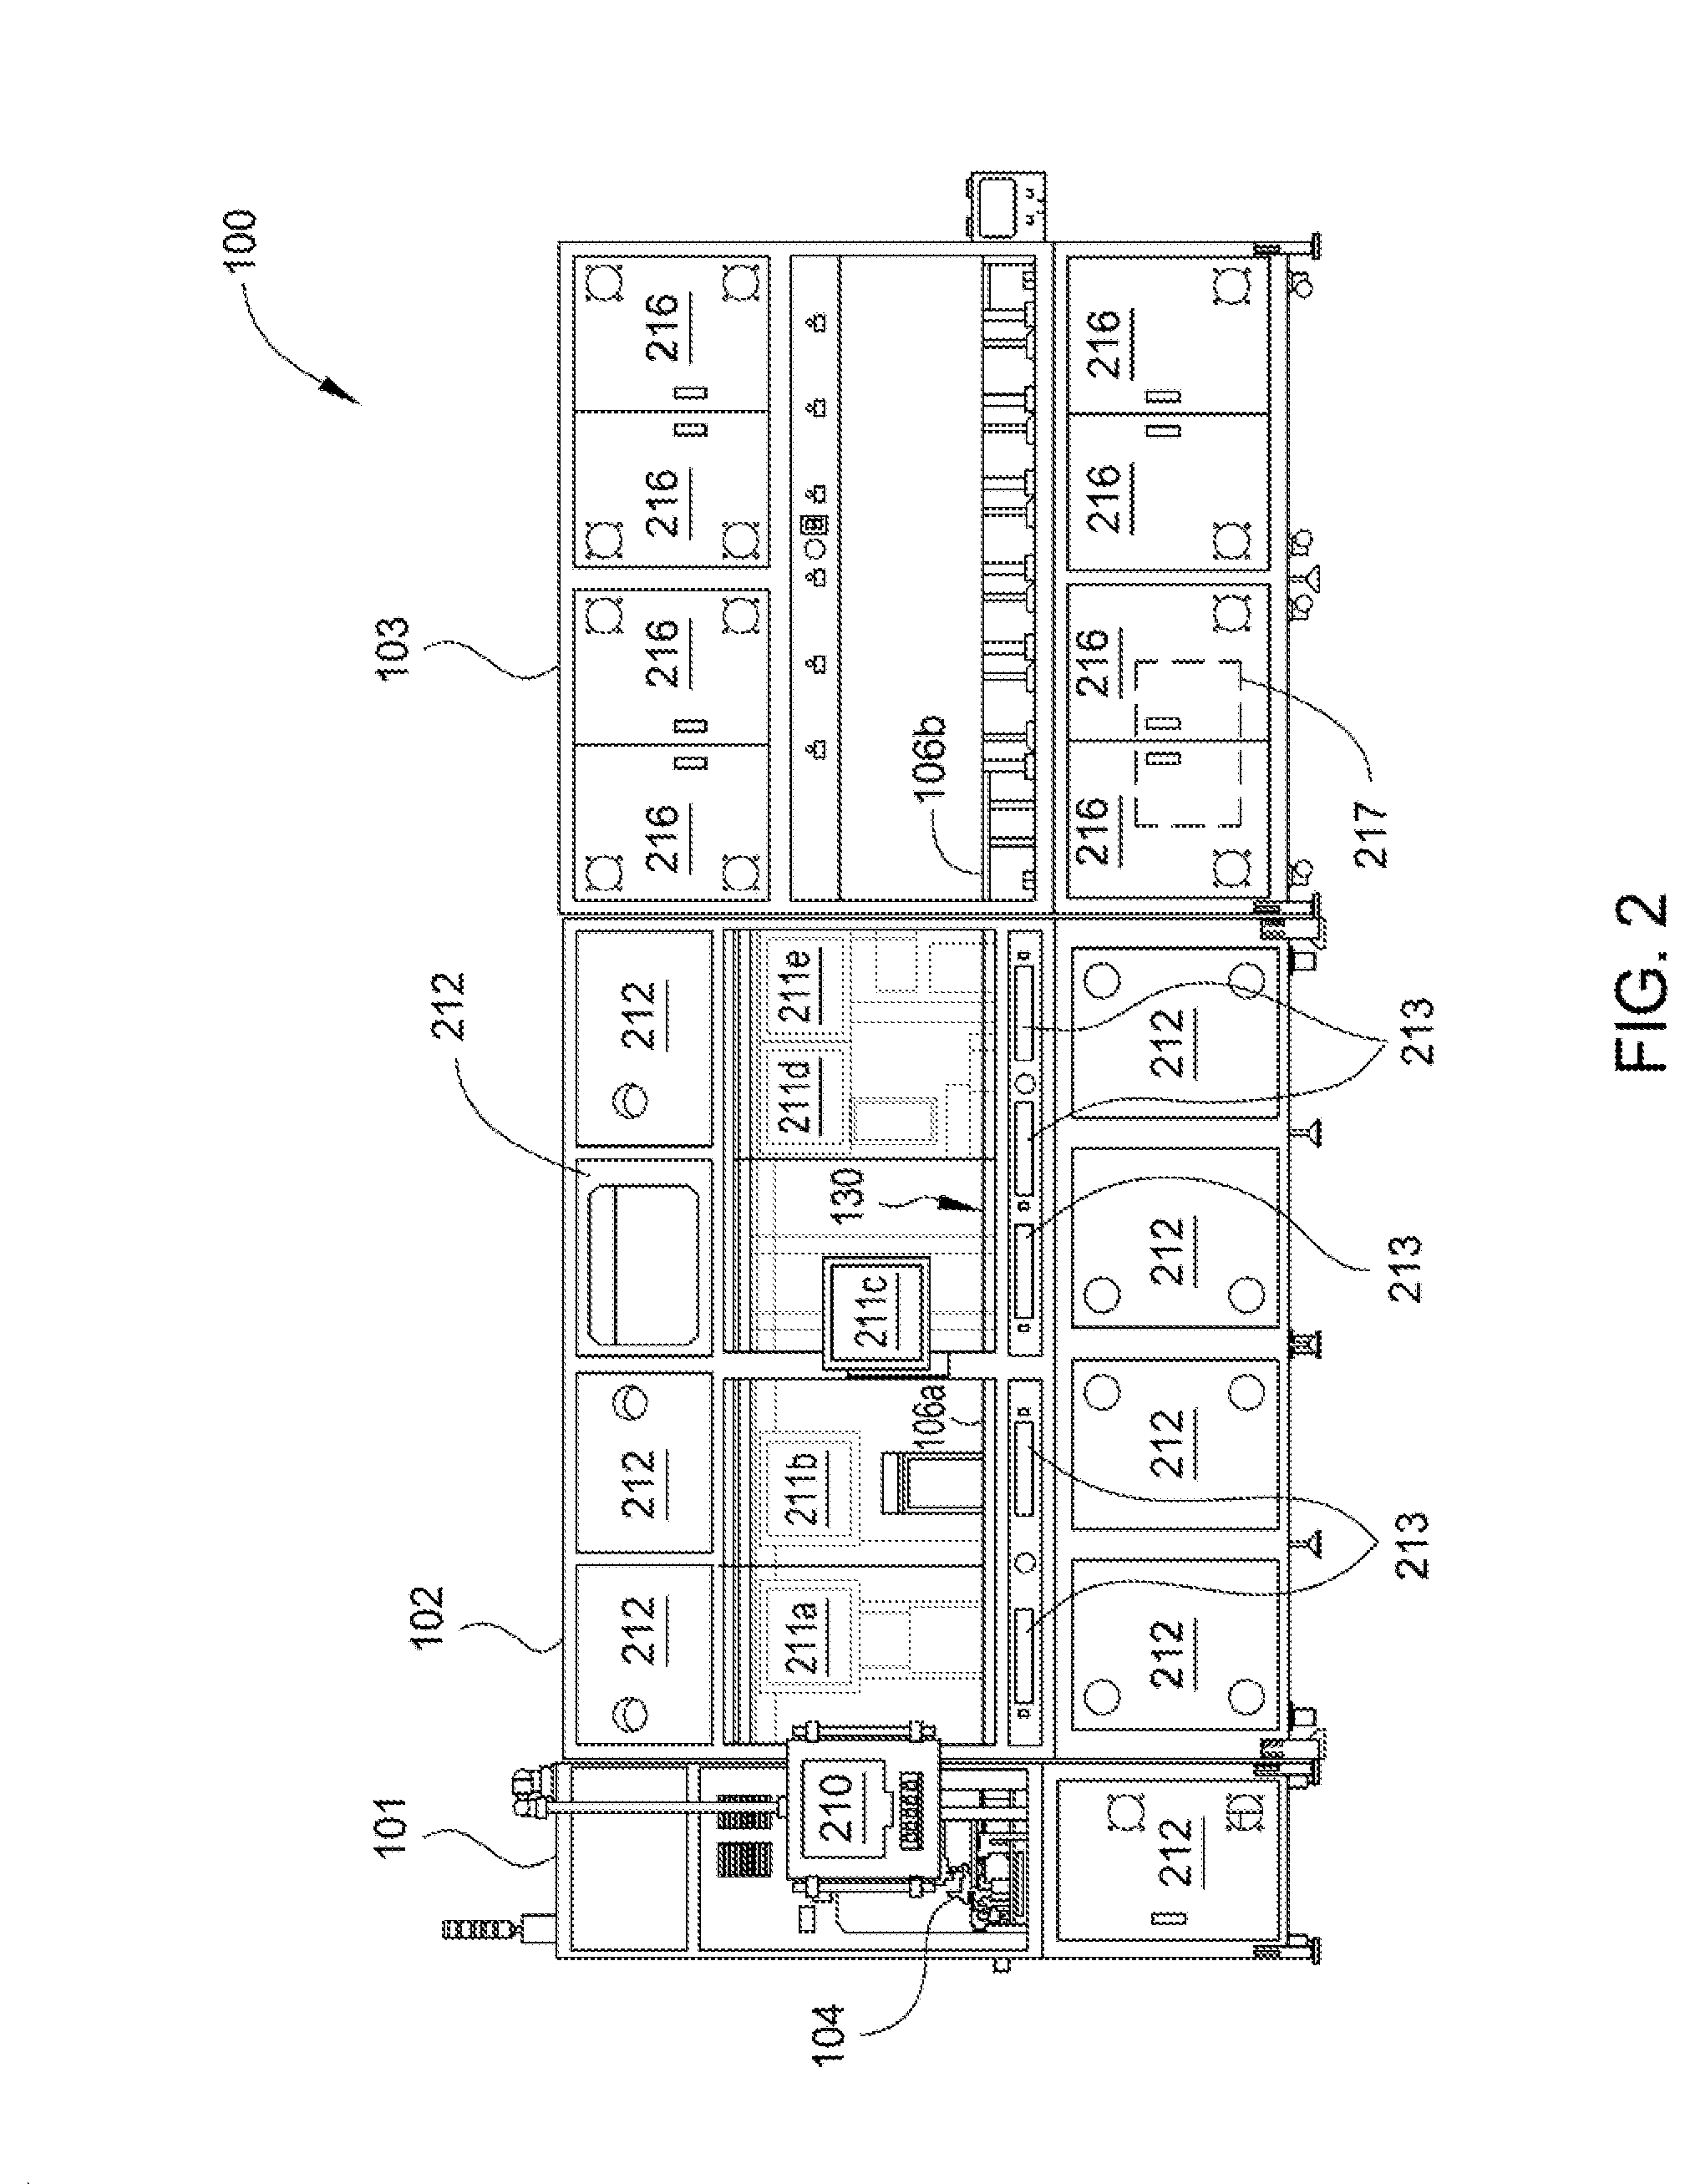 Linear inspection system